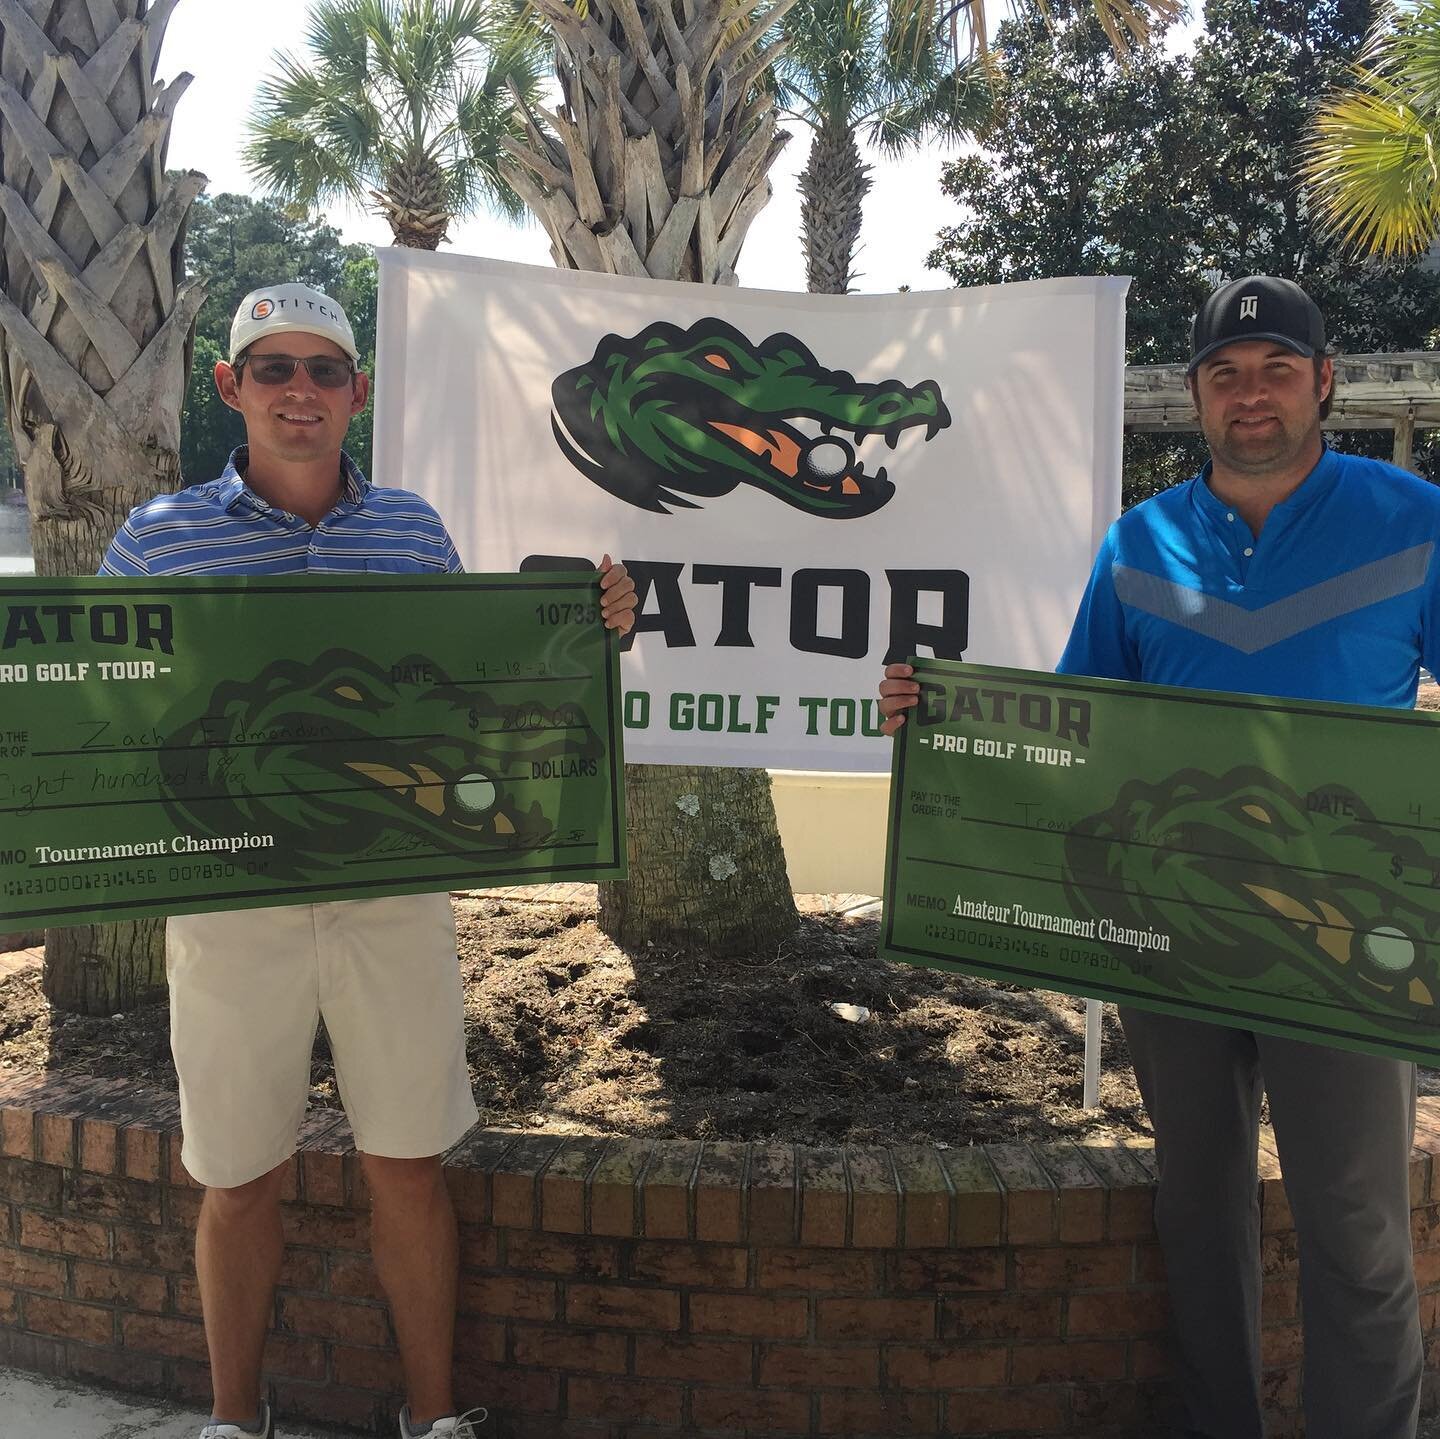 Wachesaw Golf Plantation East was a fantastic host to the Gator Golf Tours second event of the year. 

Zach Edmondson of Cary, NC wins back to back! He made 5 birdies and an eagle to shoot -6 66.

Zach is a former US Open player and Korn Ferry Tour p